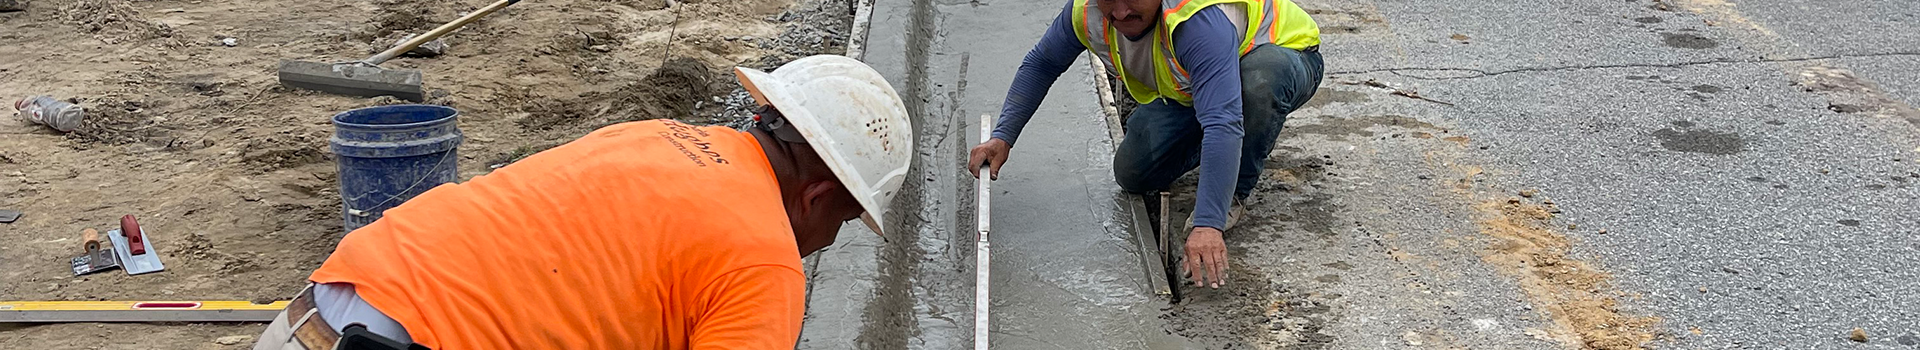 Workers working on a curb